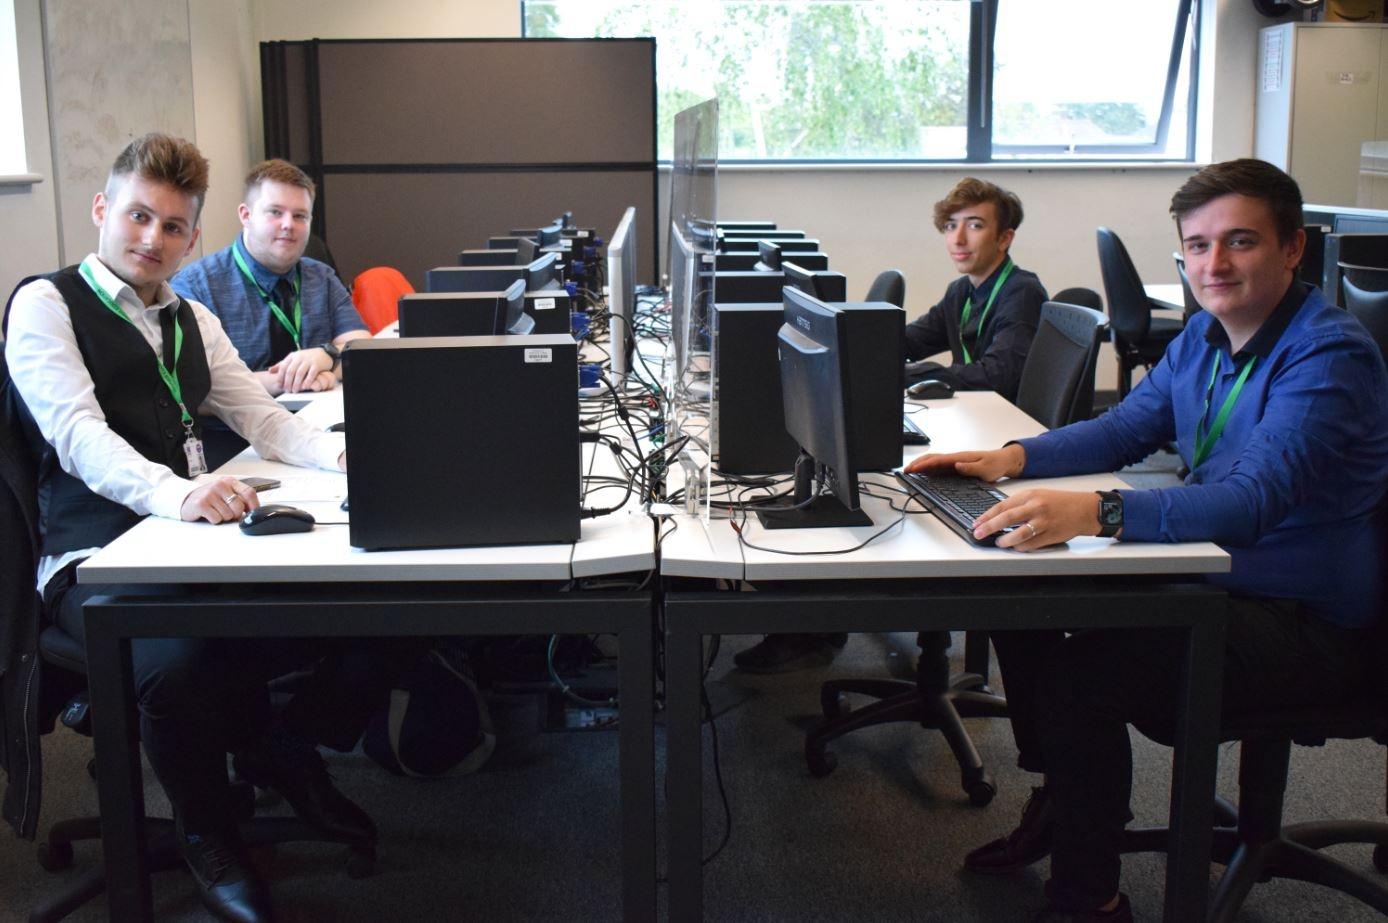 North Kent College Computing students sitting at their computer screen